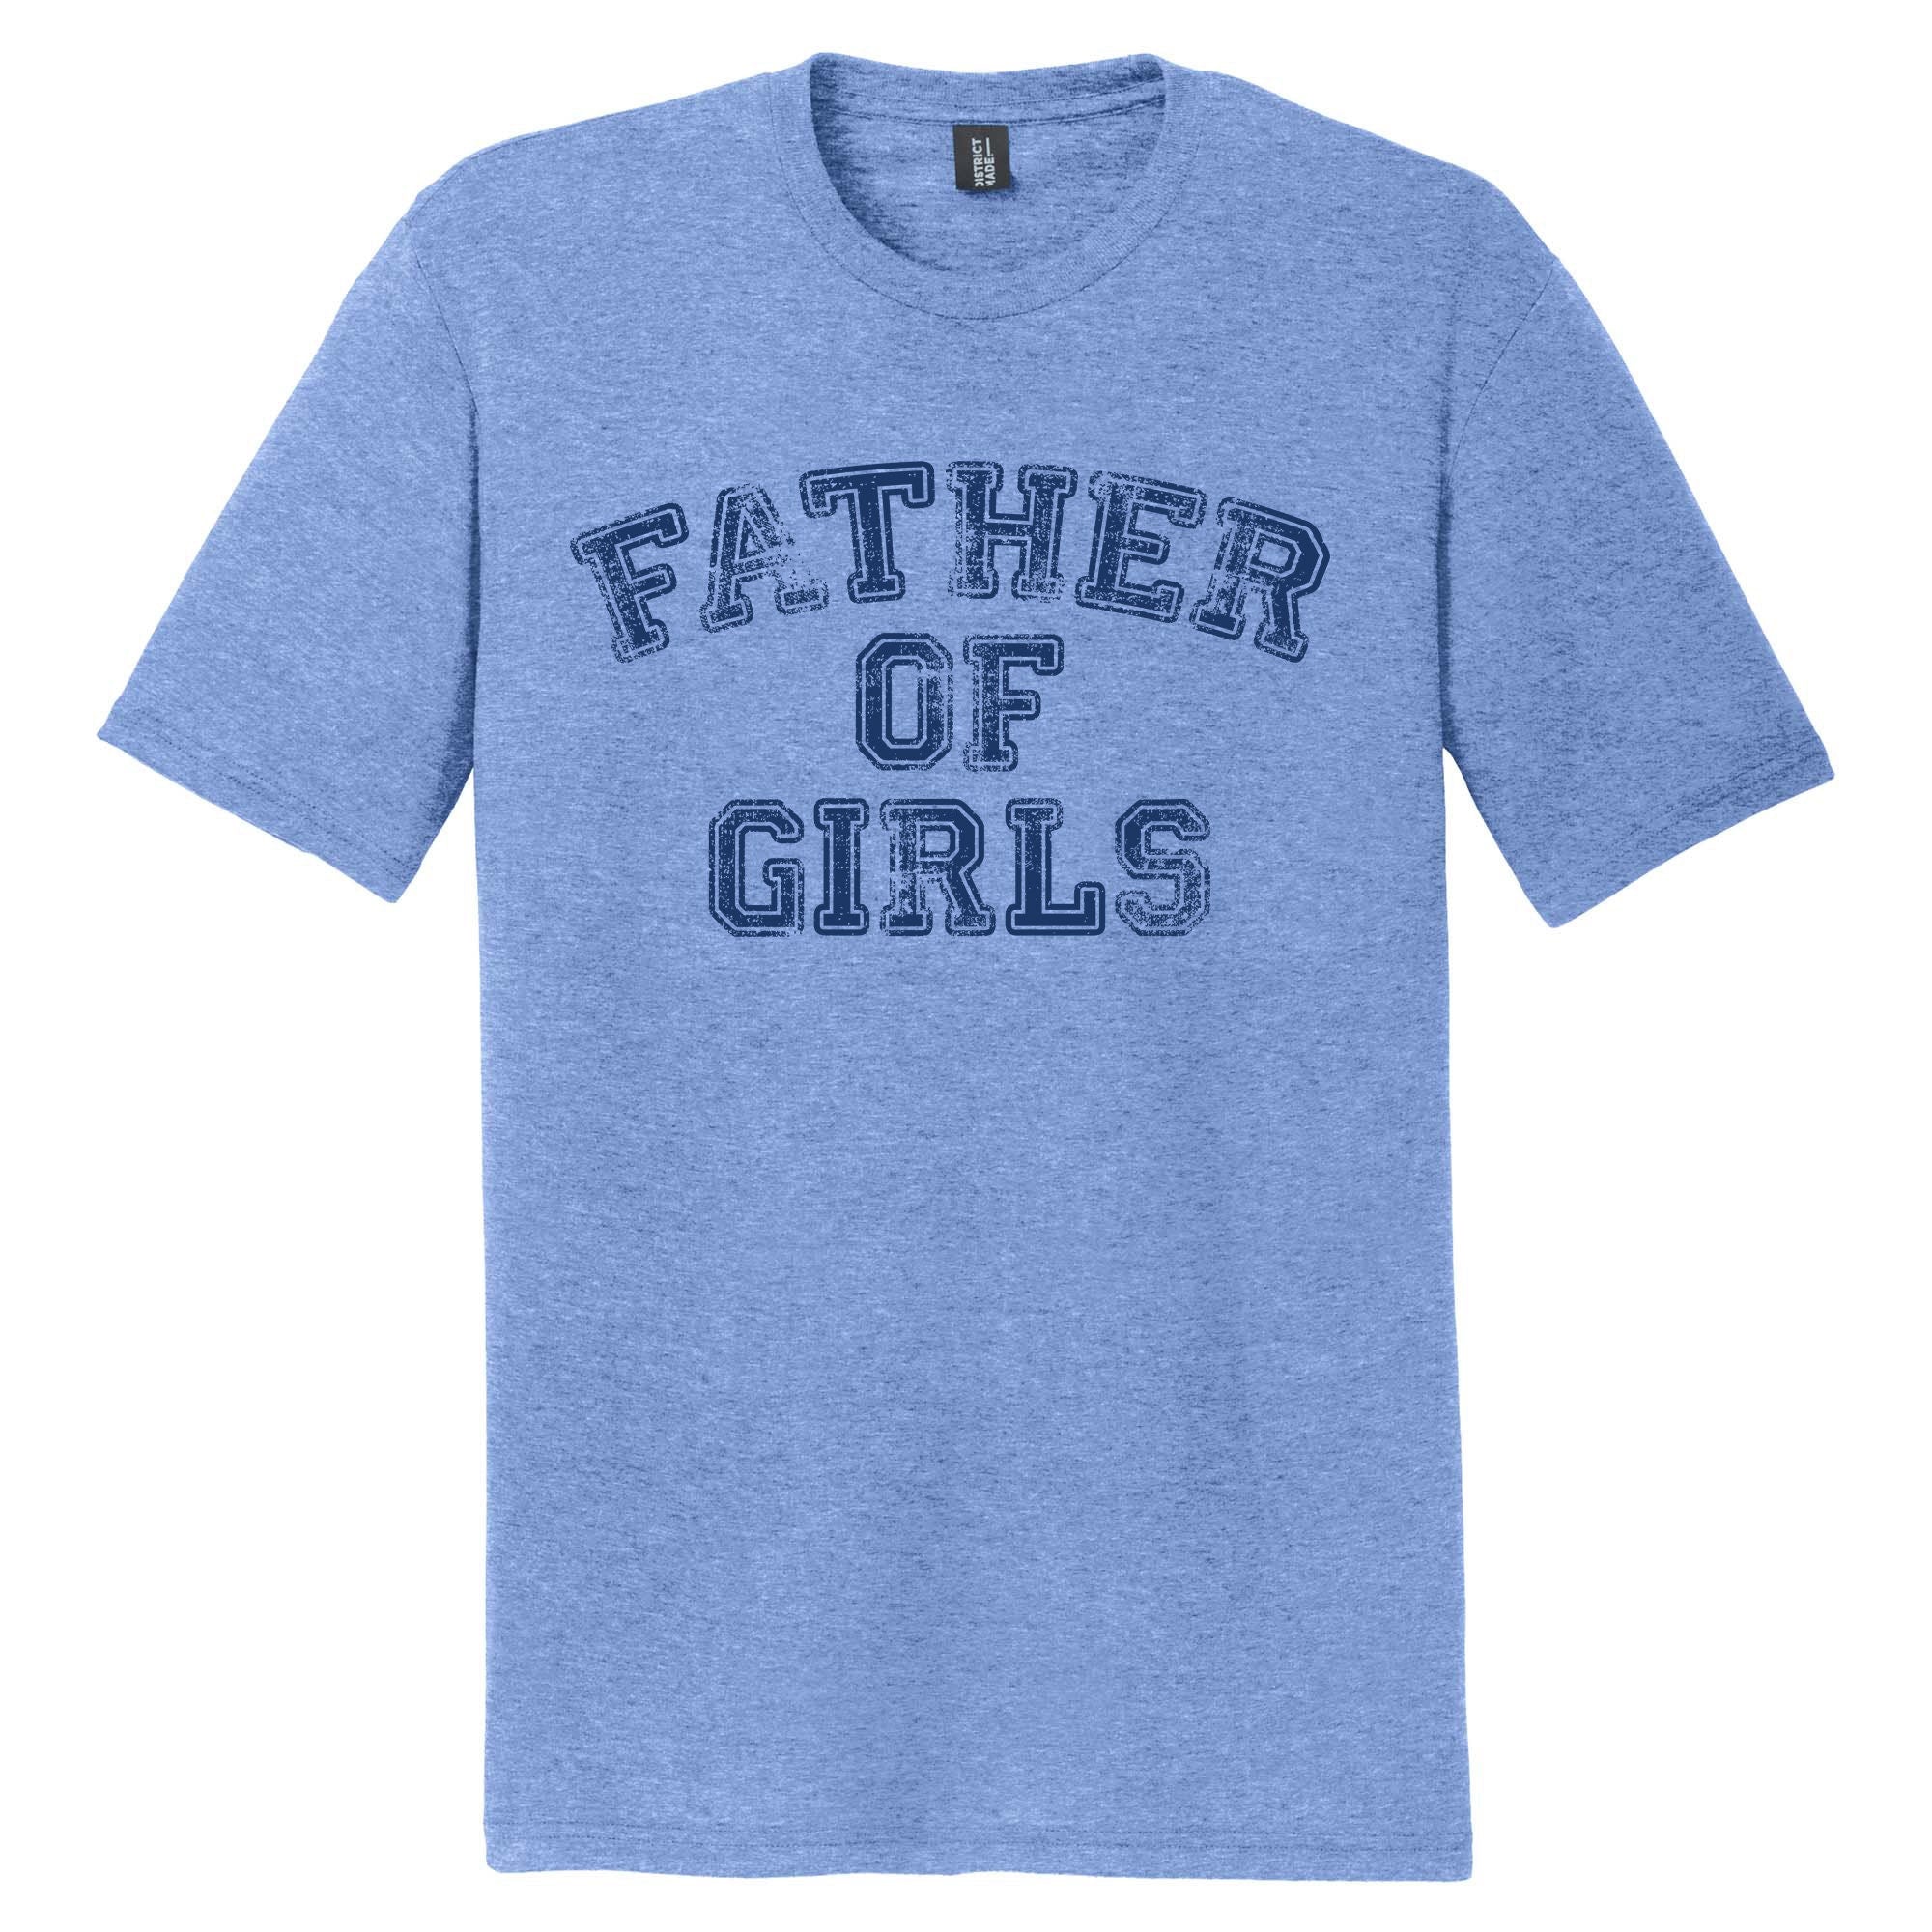 Father Of Girls Mens Crew Tee Blue